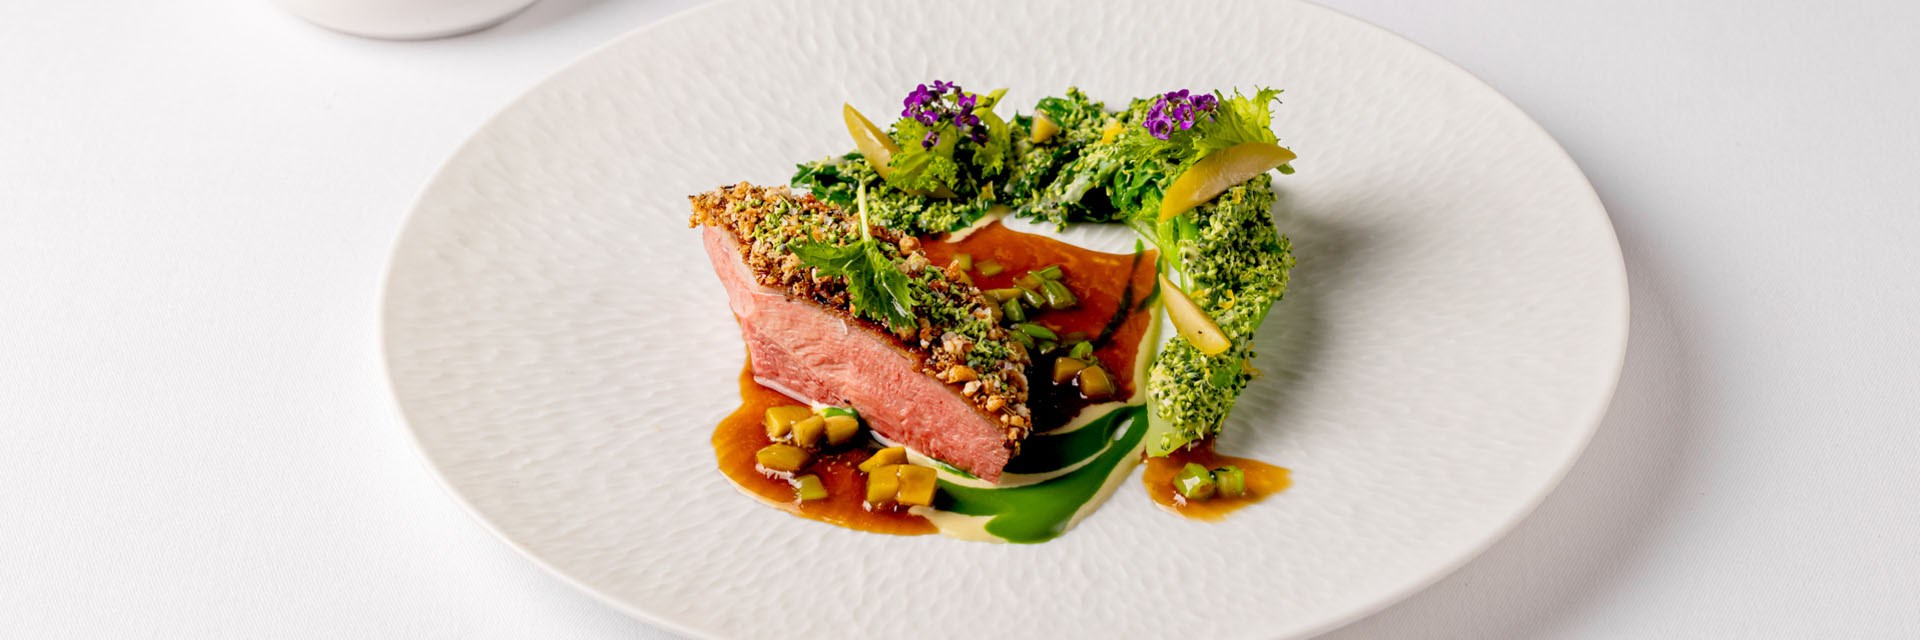 Helene Darroze red meat dish served with green vegetables